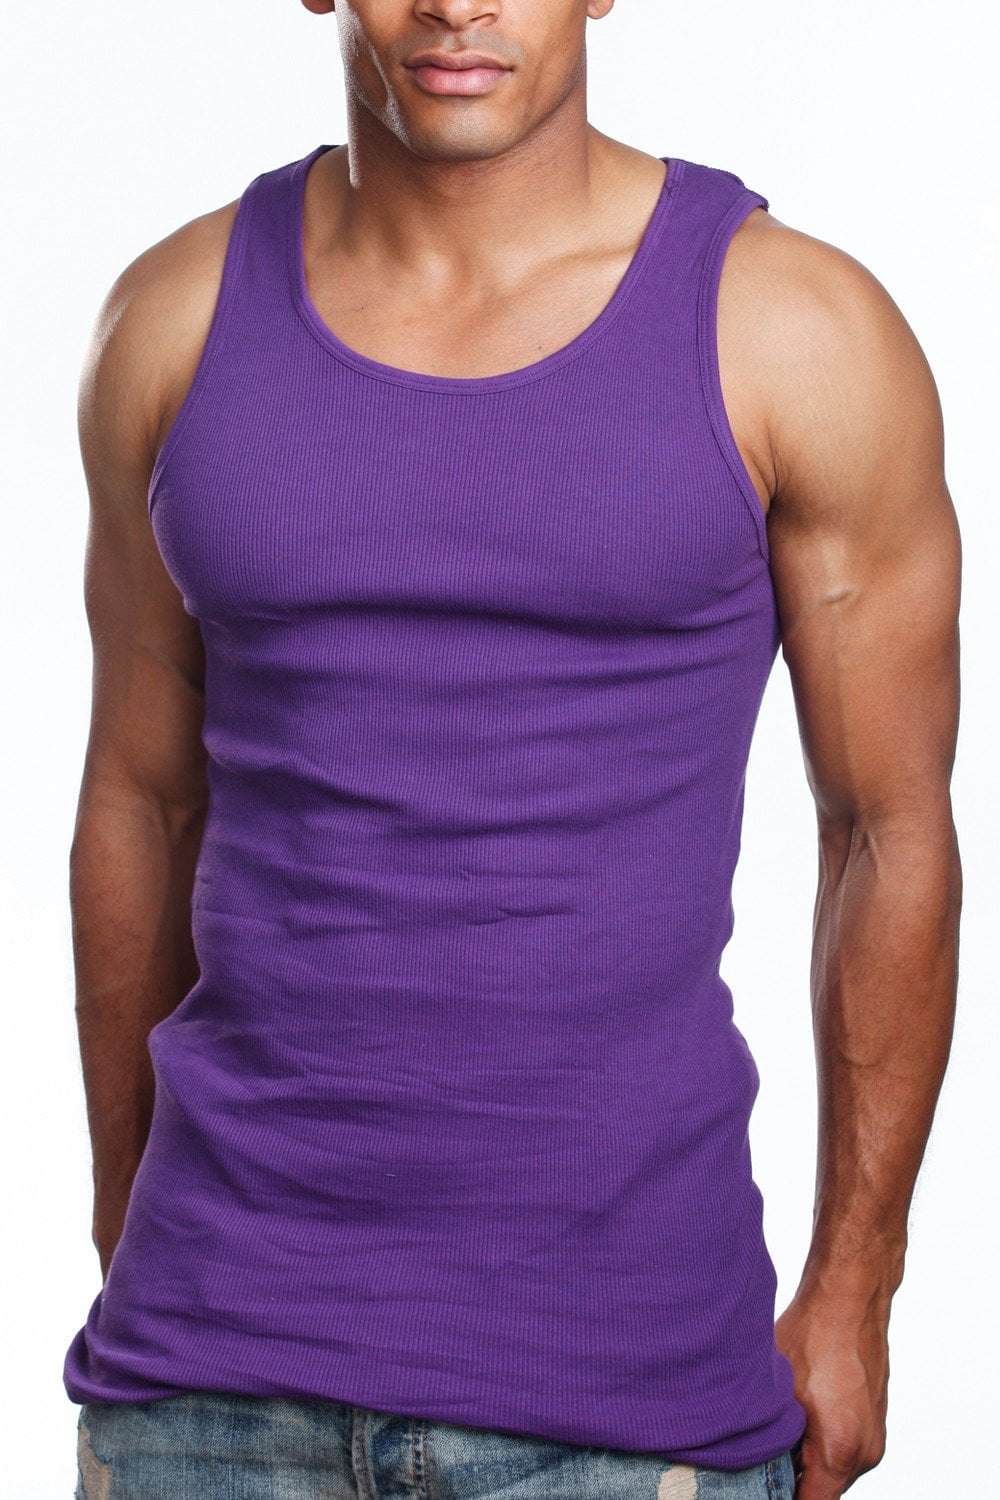 Men’s 6 Pack Tank Top A Shirt-100% Cotton Ribbed Undershirts-Multicolor ...